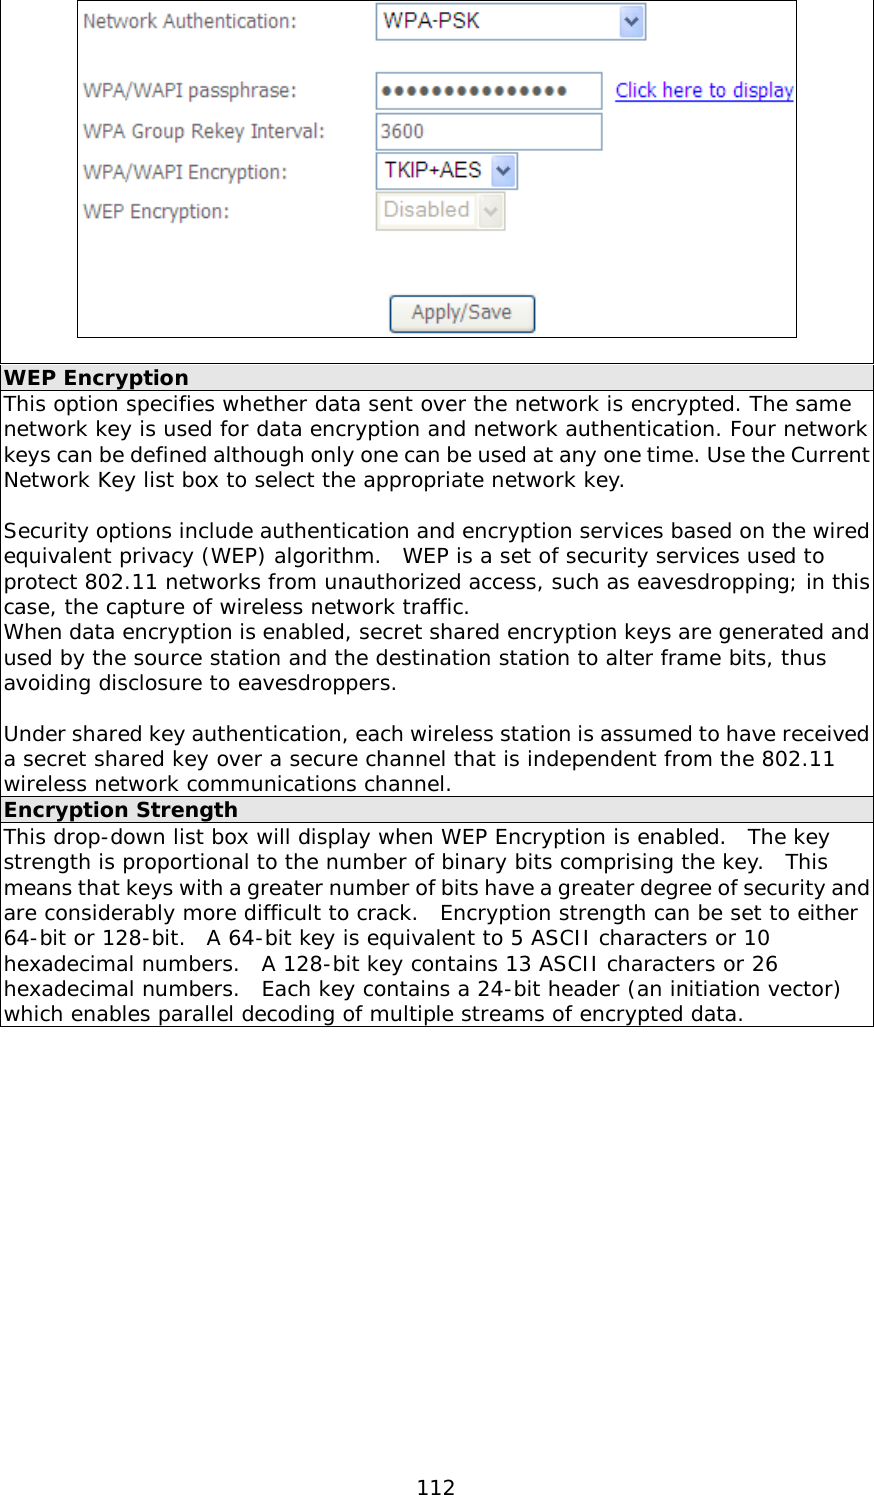  112   WEP Encryption This option specifies whether data sent over the network is encrypted. The same network key is used for data encryption and network authentication. Four network keys can be defined although only one can be used at any one time. Use the Current Network Key list box to select the appropriate network key.   Security options include authentication and encryption services based on the wired equivalent privacy (WEP) algorithm.  WEP is a set of security services used to protect 802.11 networks from unauthorized access, such as eavesdropping; in this case, the capture of wireless network traffic.   When data encryption is enabled, secret shared encryption keys are generated and used by the source station and the destination station to alter frame bits, thus avoiding disclosure to eavesdroppers.  Under shared key authentication, each wireless station is assumed to have received a secret shared key over a secure channel that is independent from the 802.11 wireless network communications channel. Encryption Strength This drop-down list box will display when WEP Encryption is enabled.  The key strength is proportional to the number of binary bits comprising the key.  This means that keys with a greater number of bits have a greater degree of security and are considerably more difficult to crack.  Encryption strength can be set to either 64-bit or 128-bit.  A 64-bit key is equivalent to 5 ASCII characters or 10 hexadecimal numbers.  A 128-bit key contains 13 ASCII characters or 26 hexadecimal numbers.  Each key contains a 24-bit header (an initiation vector) which enables parallel decoding of multiple streams of encrypted data.    